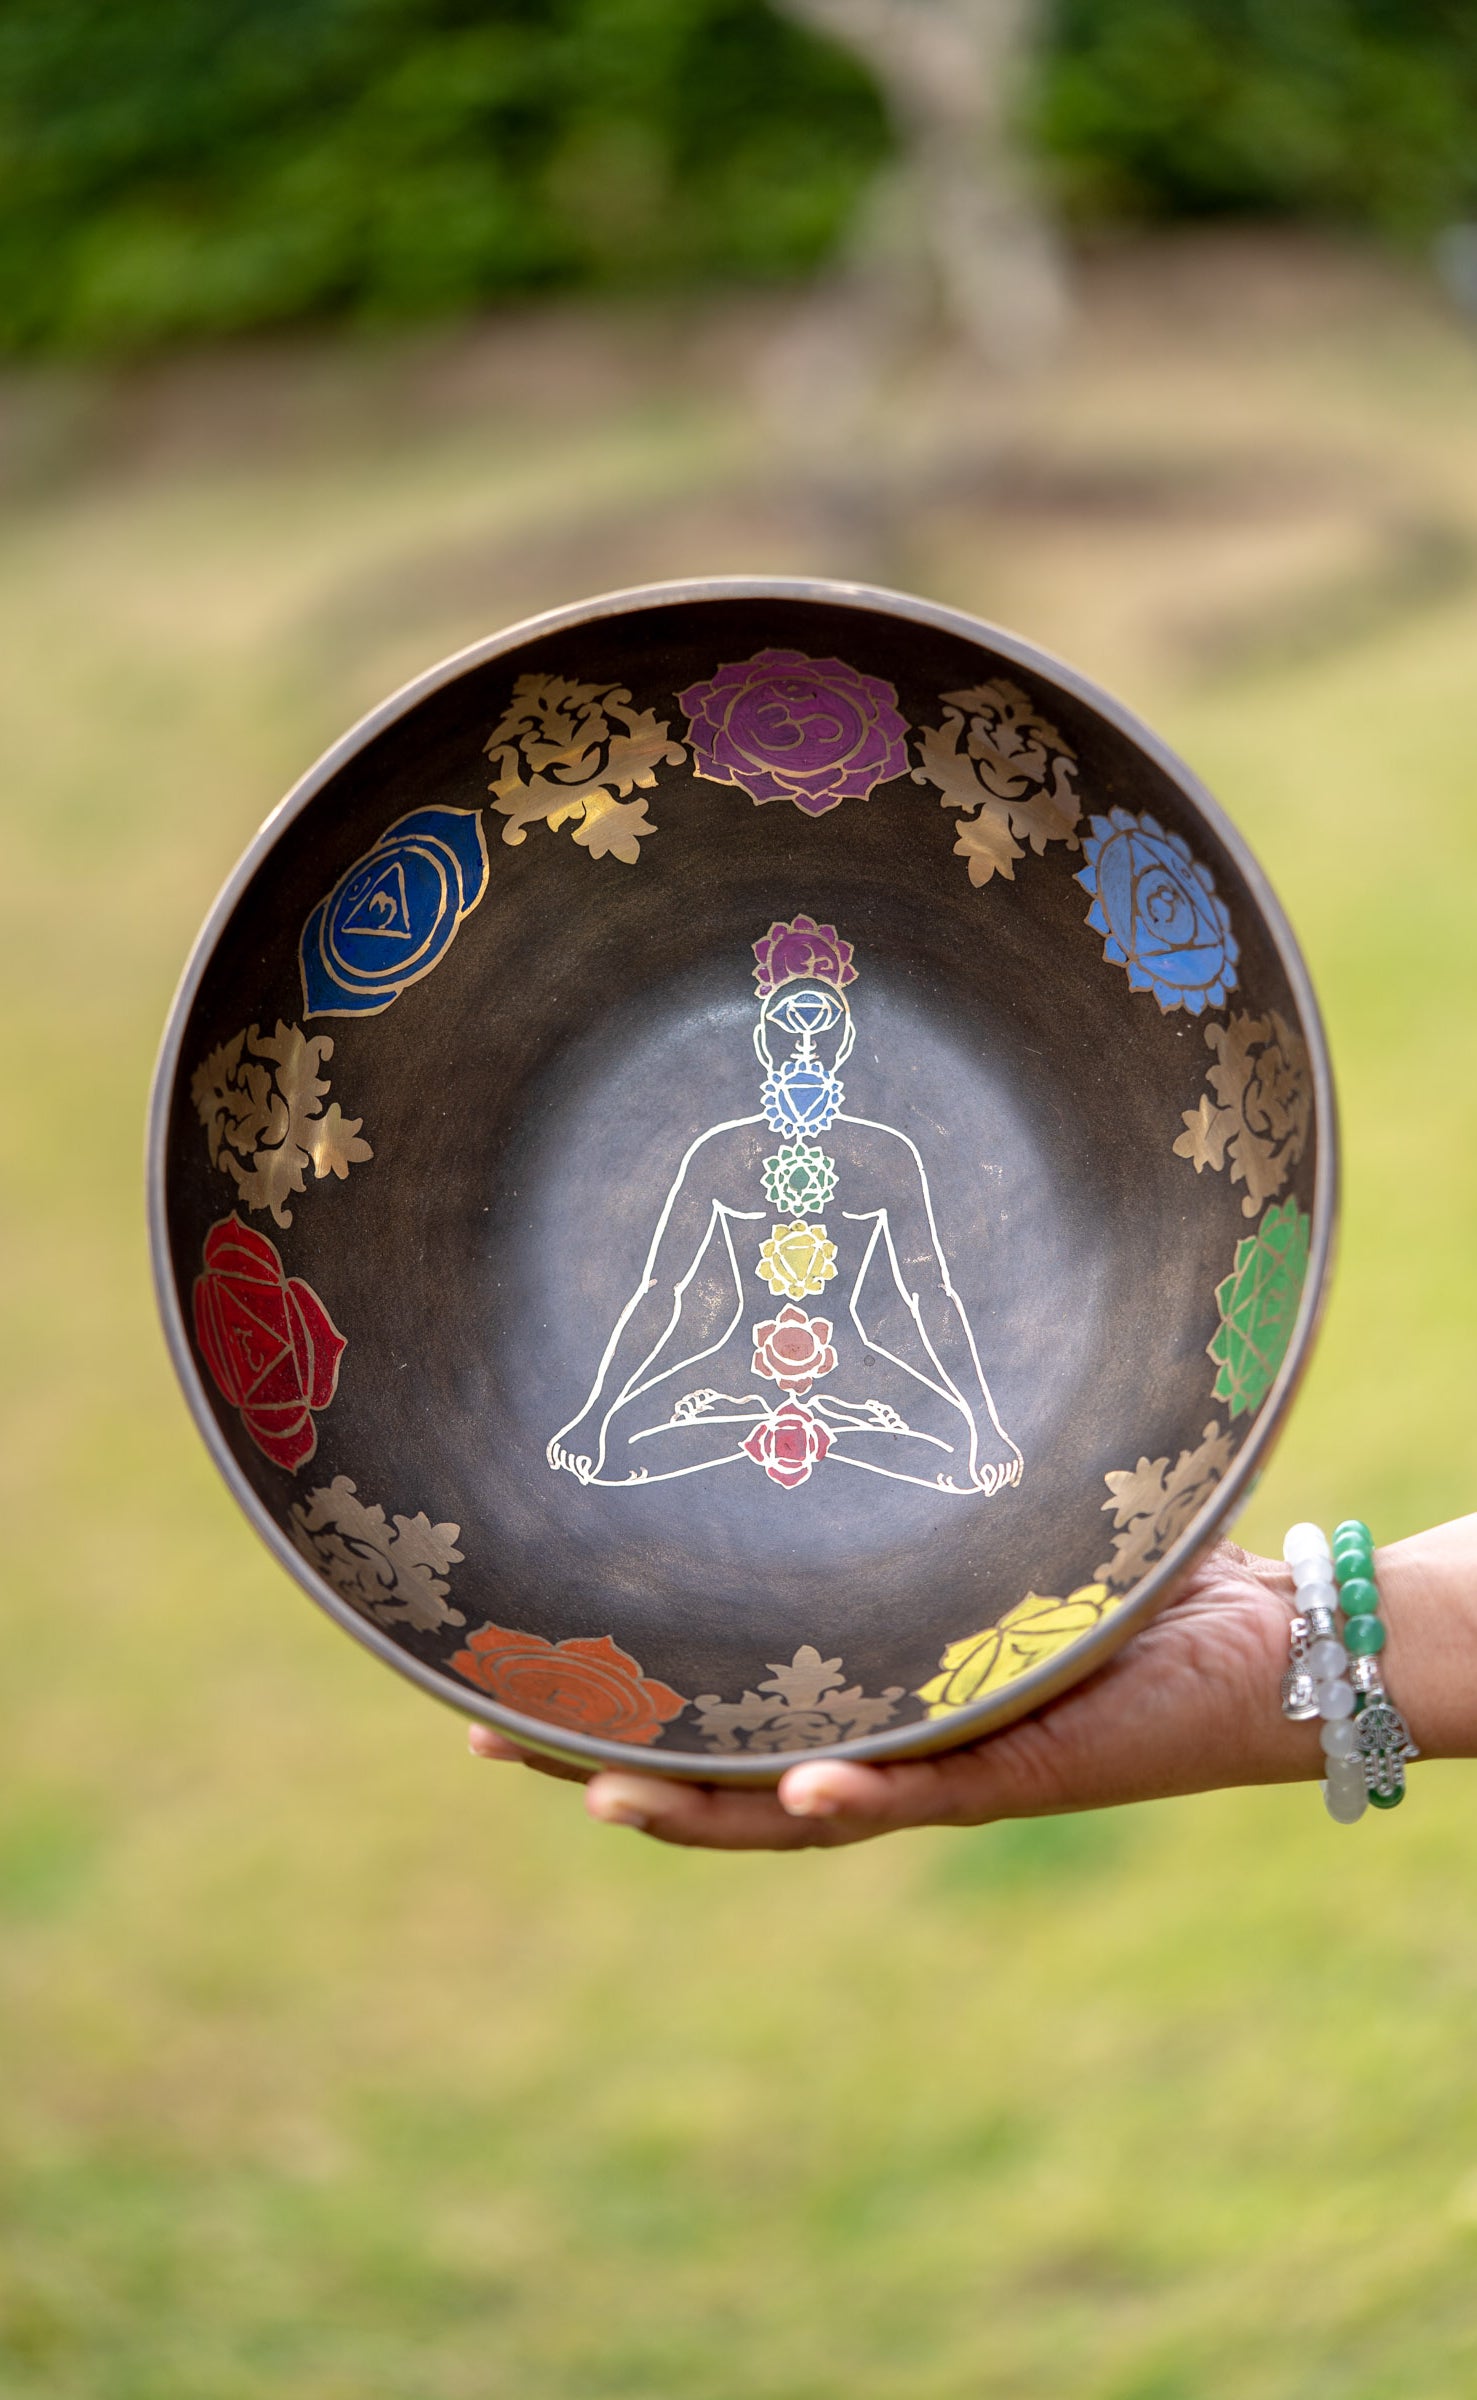 7 Chakra singing bowls can be a helpful tool for relaxation and self-reflection.